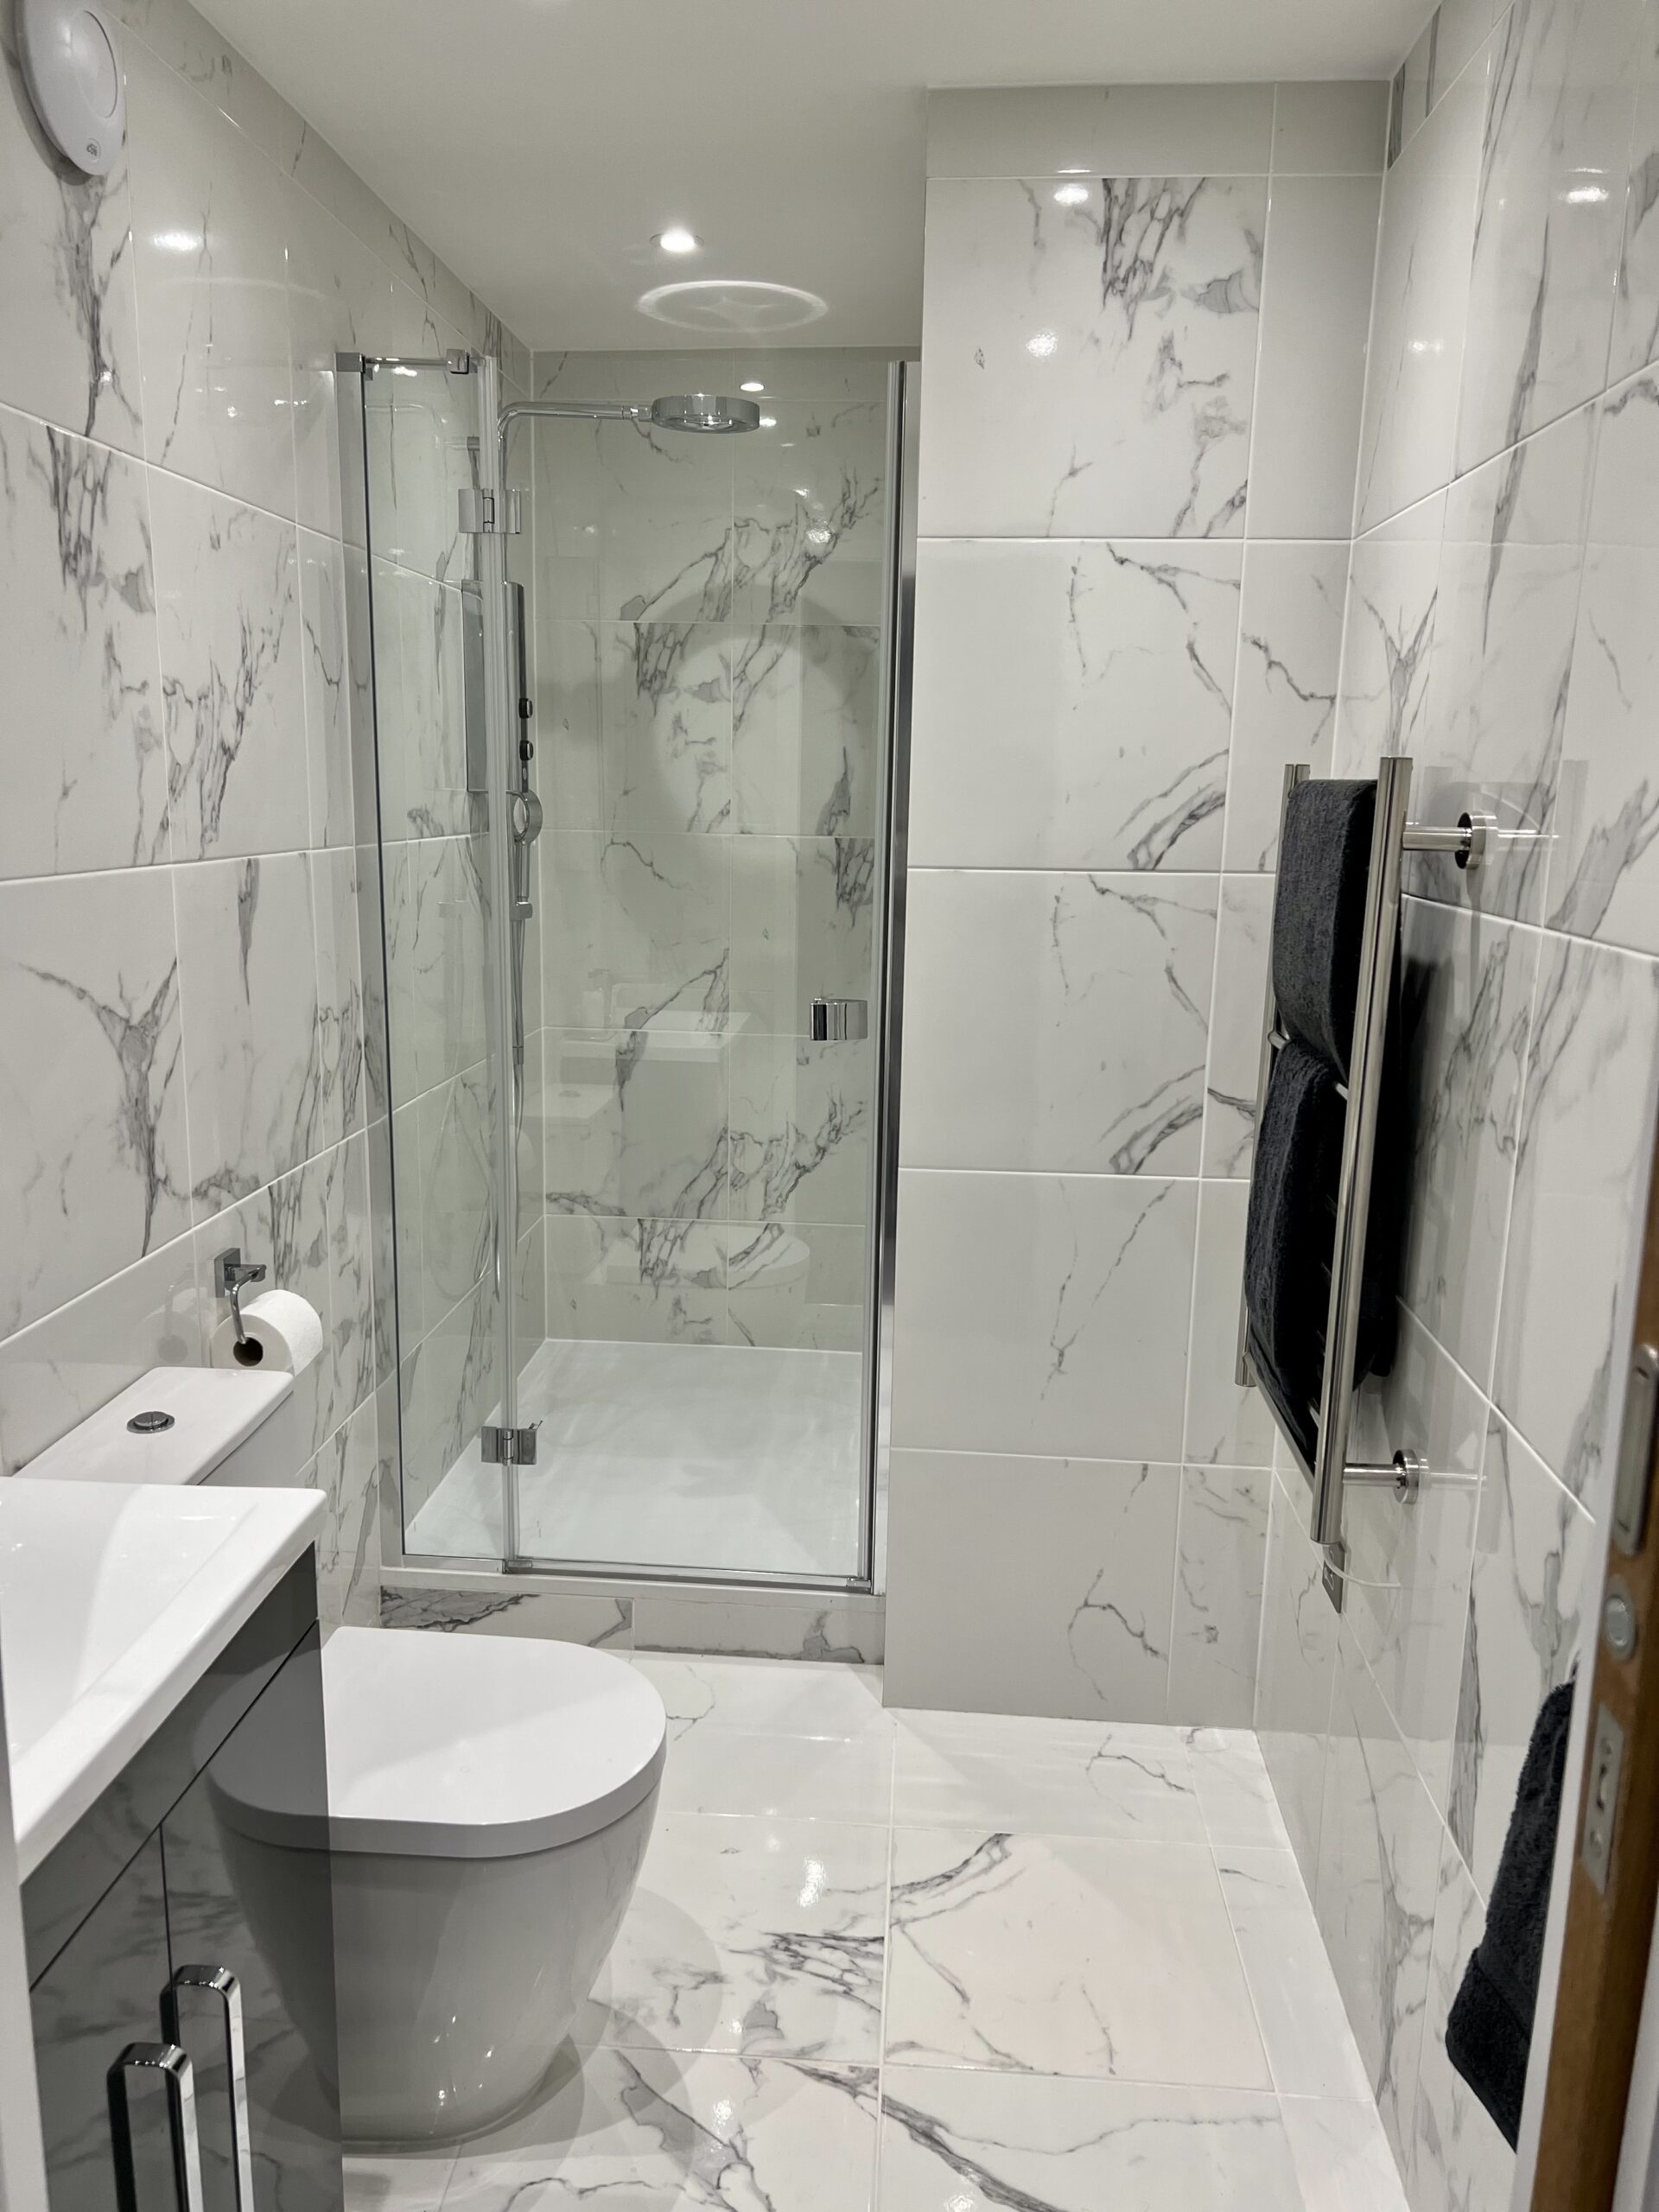 Interior shot of a brightly lit Vivid Green garden studio shower room with toilet featuring marble tiling on the floor and walls, silver bathroom fittings a shower with a frameless glass door, a white toilet and the corner of the bathroom sink